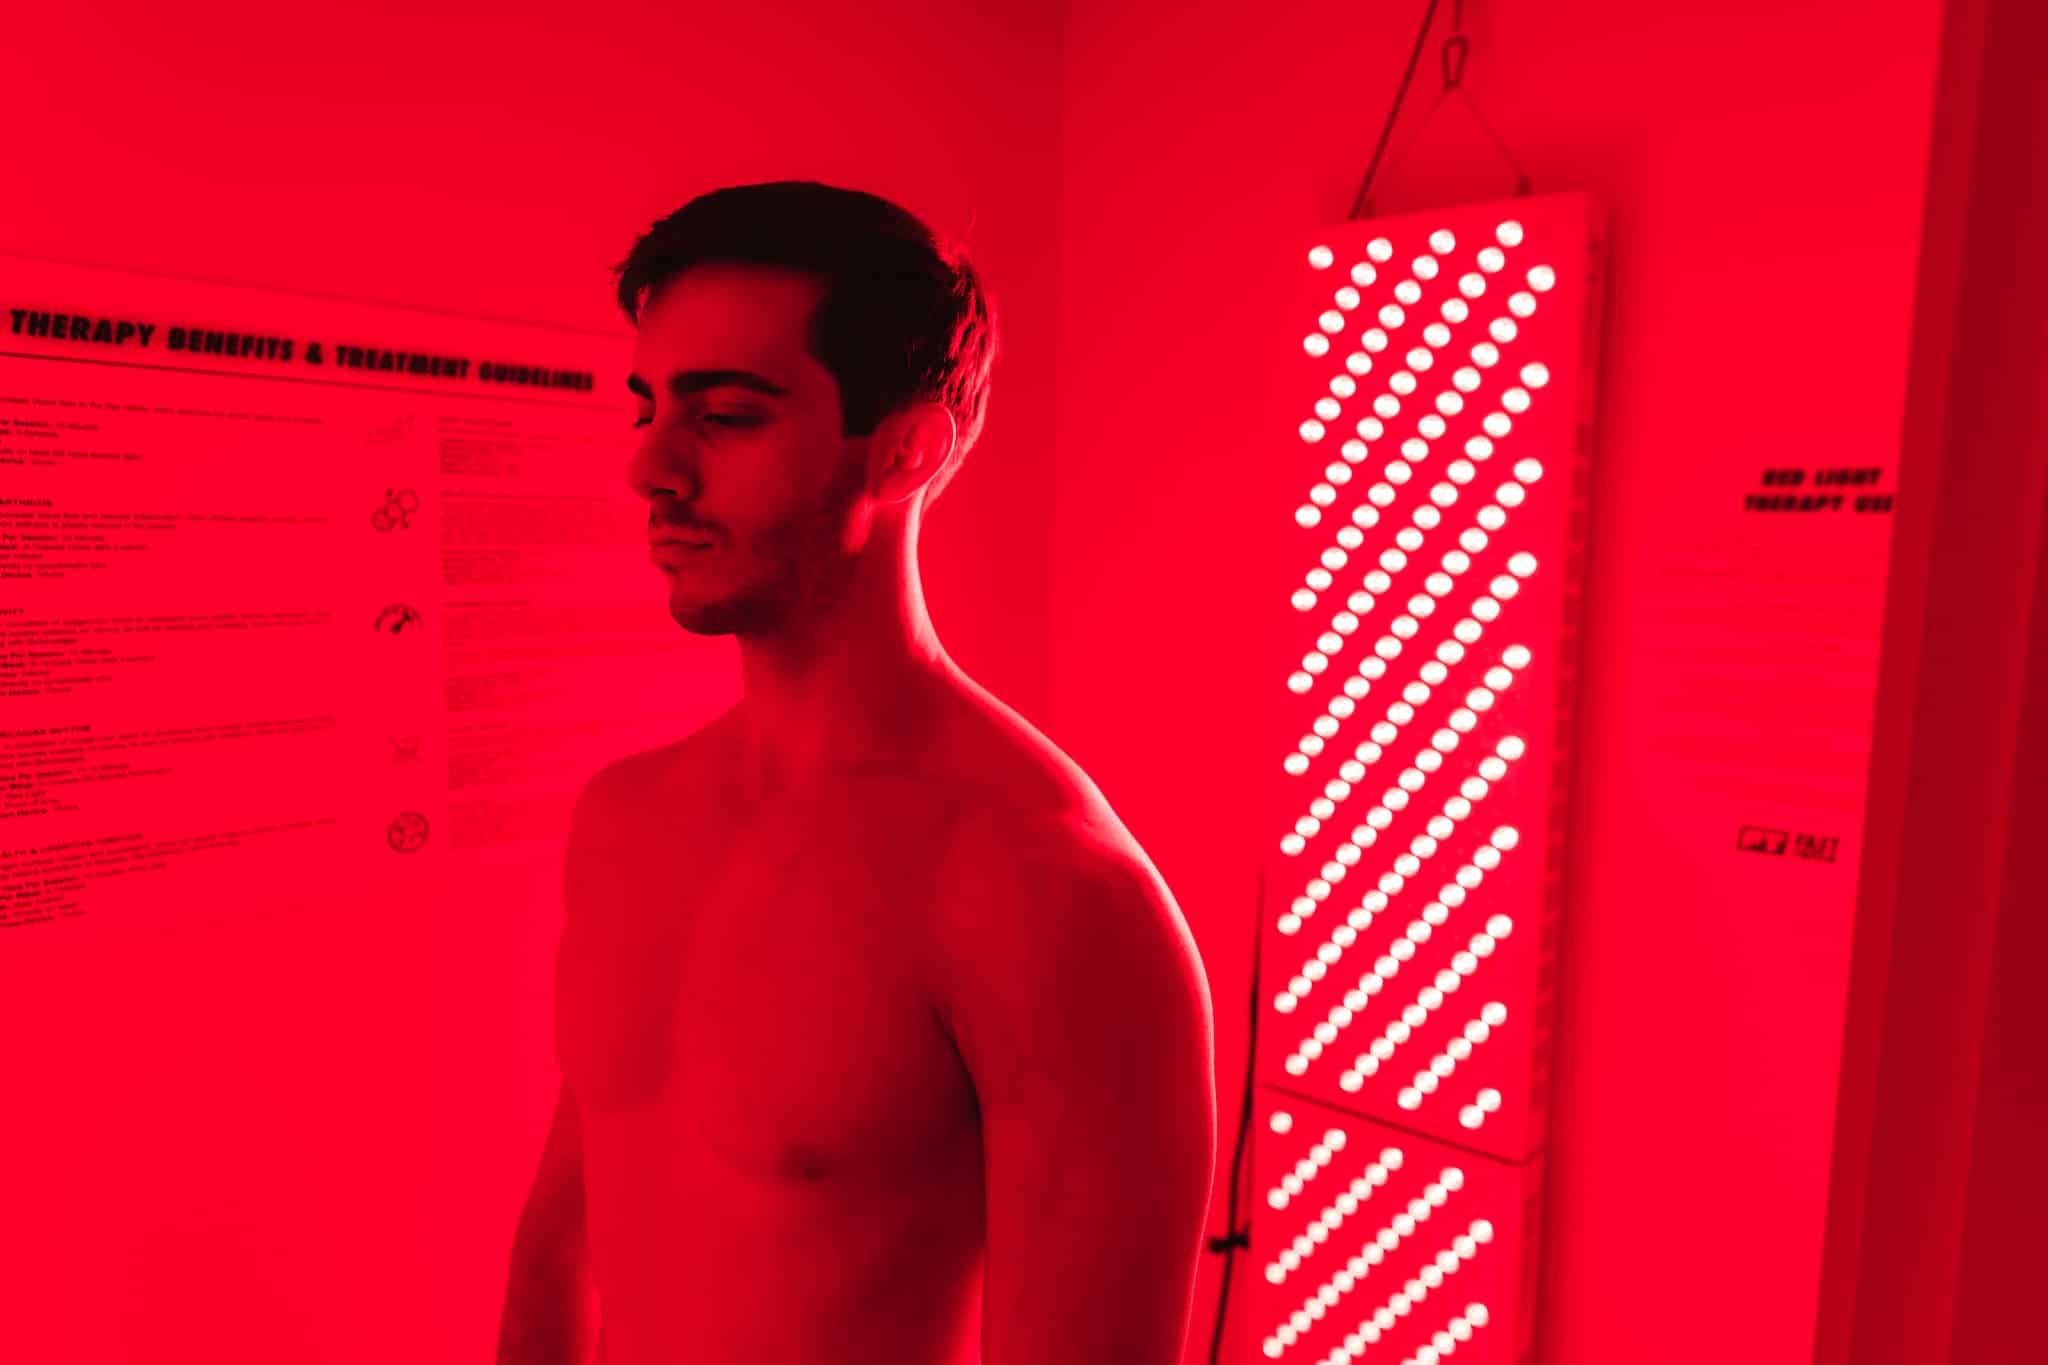 Red Light Therapy: Does it Work? Benefits, Risks & Safety